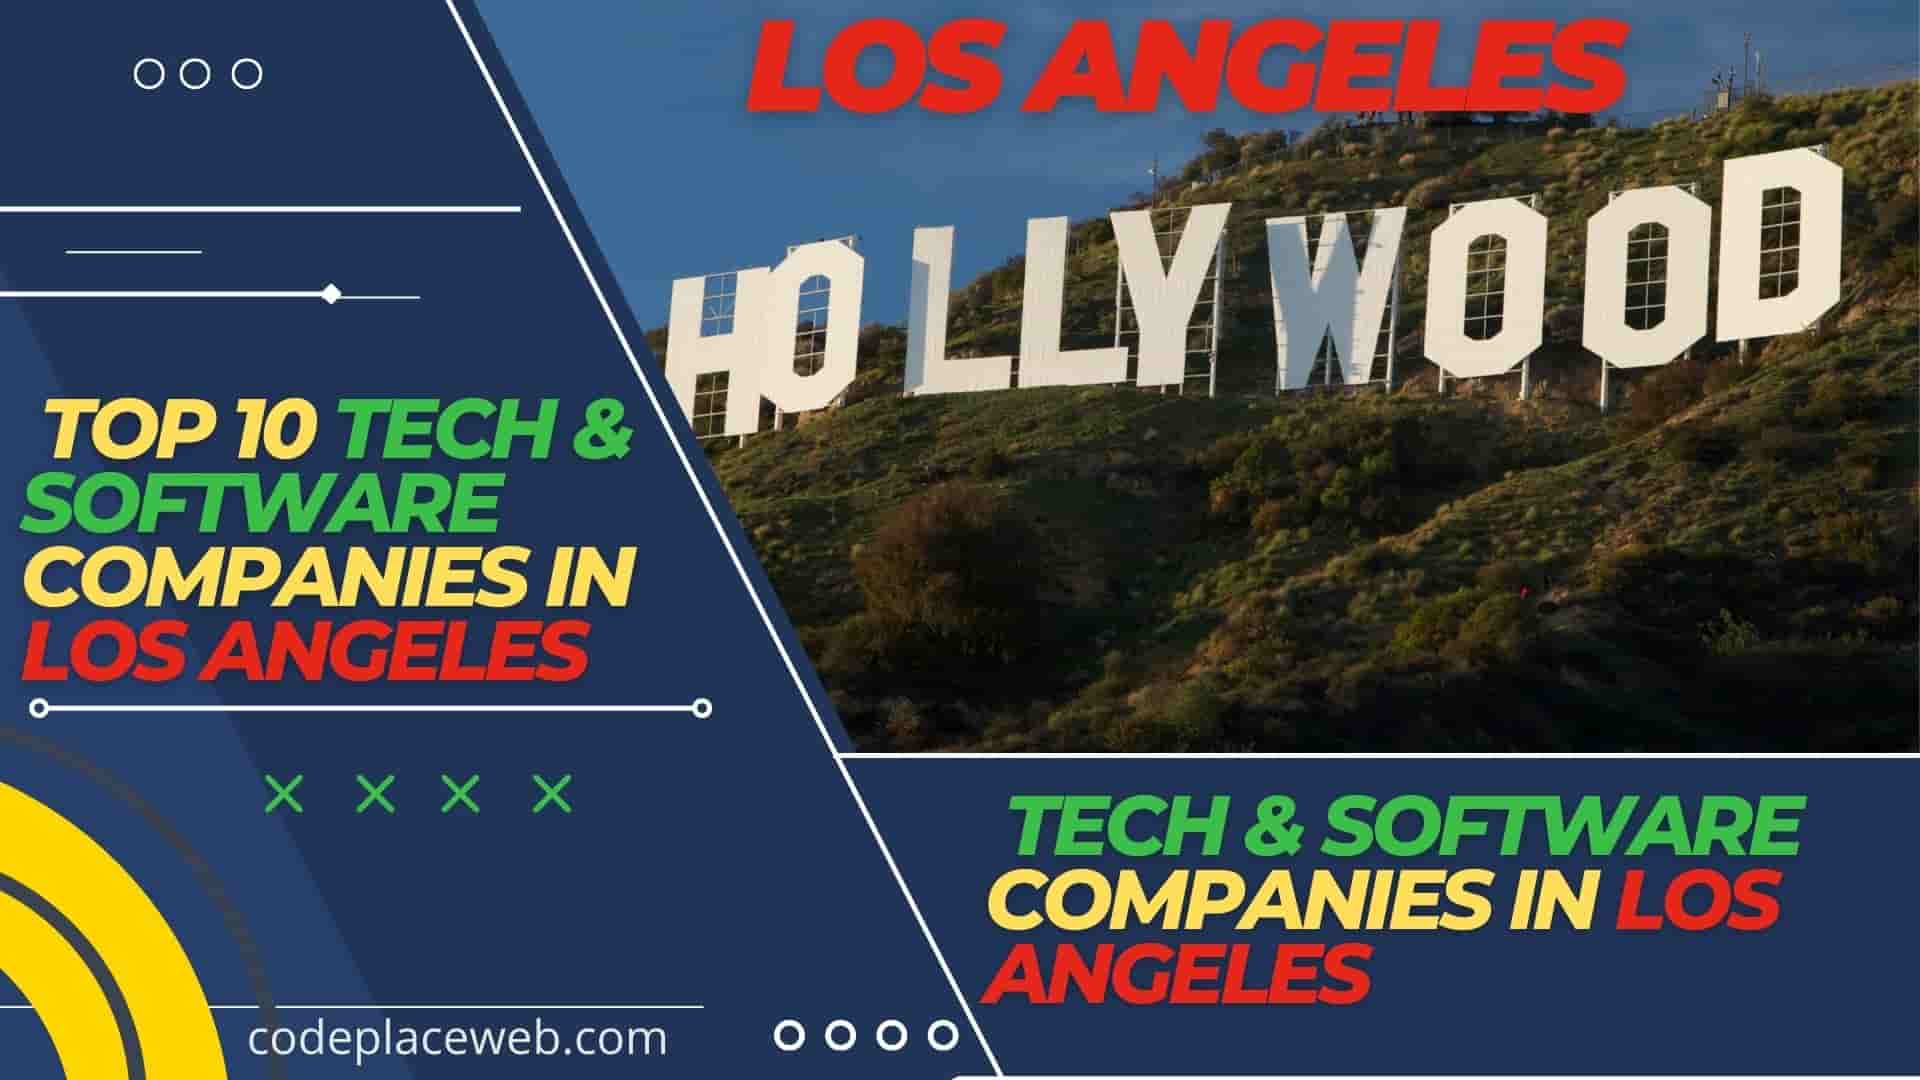 List-of-Top-10-IT-&-Software-Companies-in-Los-Angeles-2022